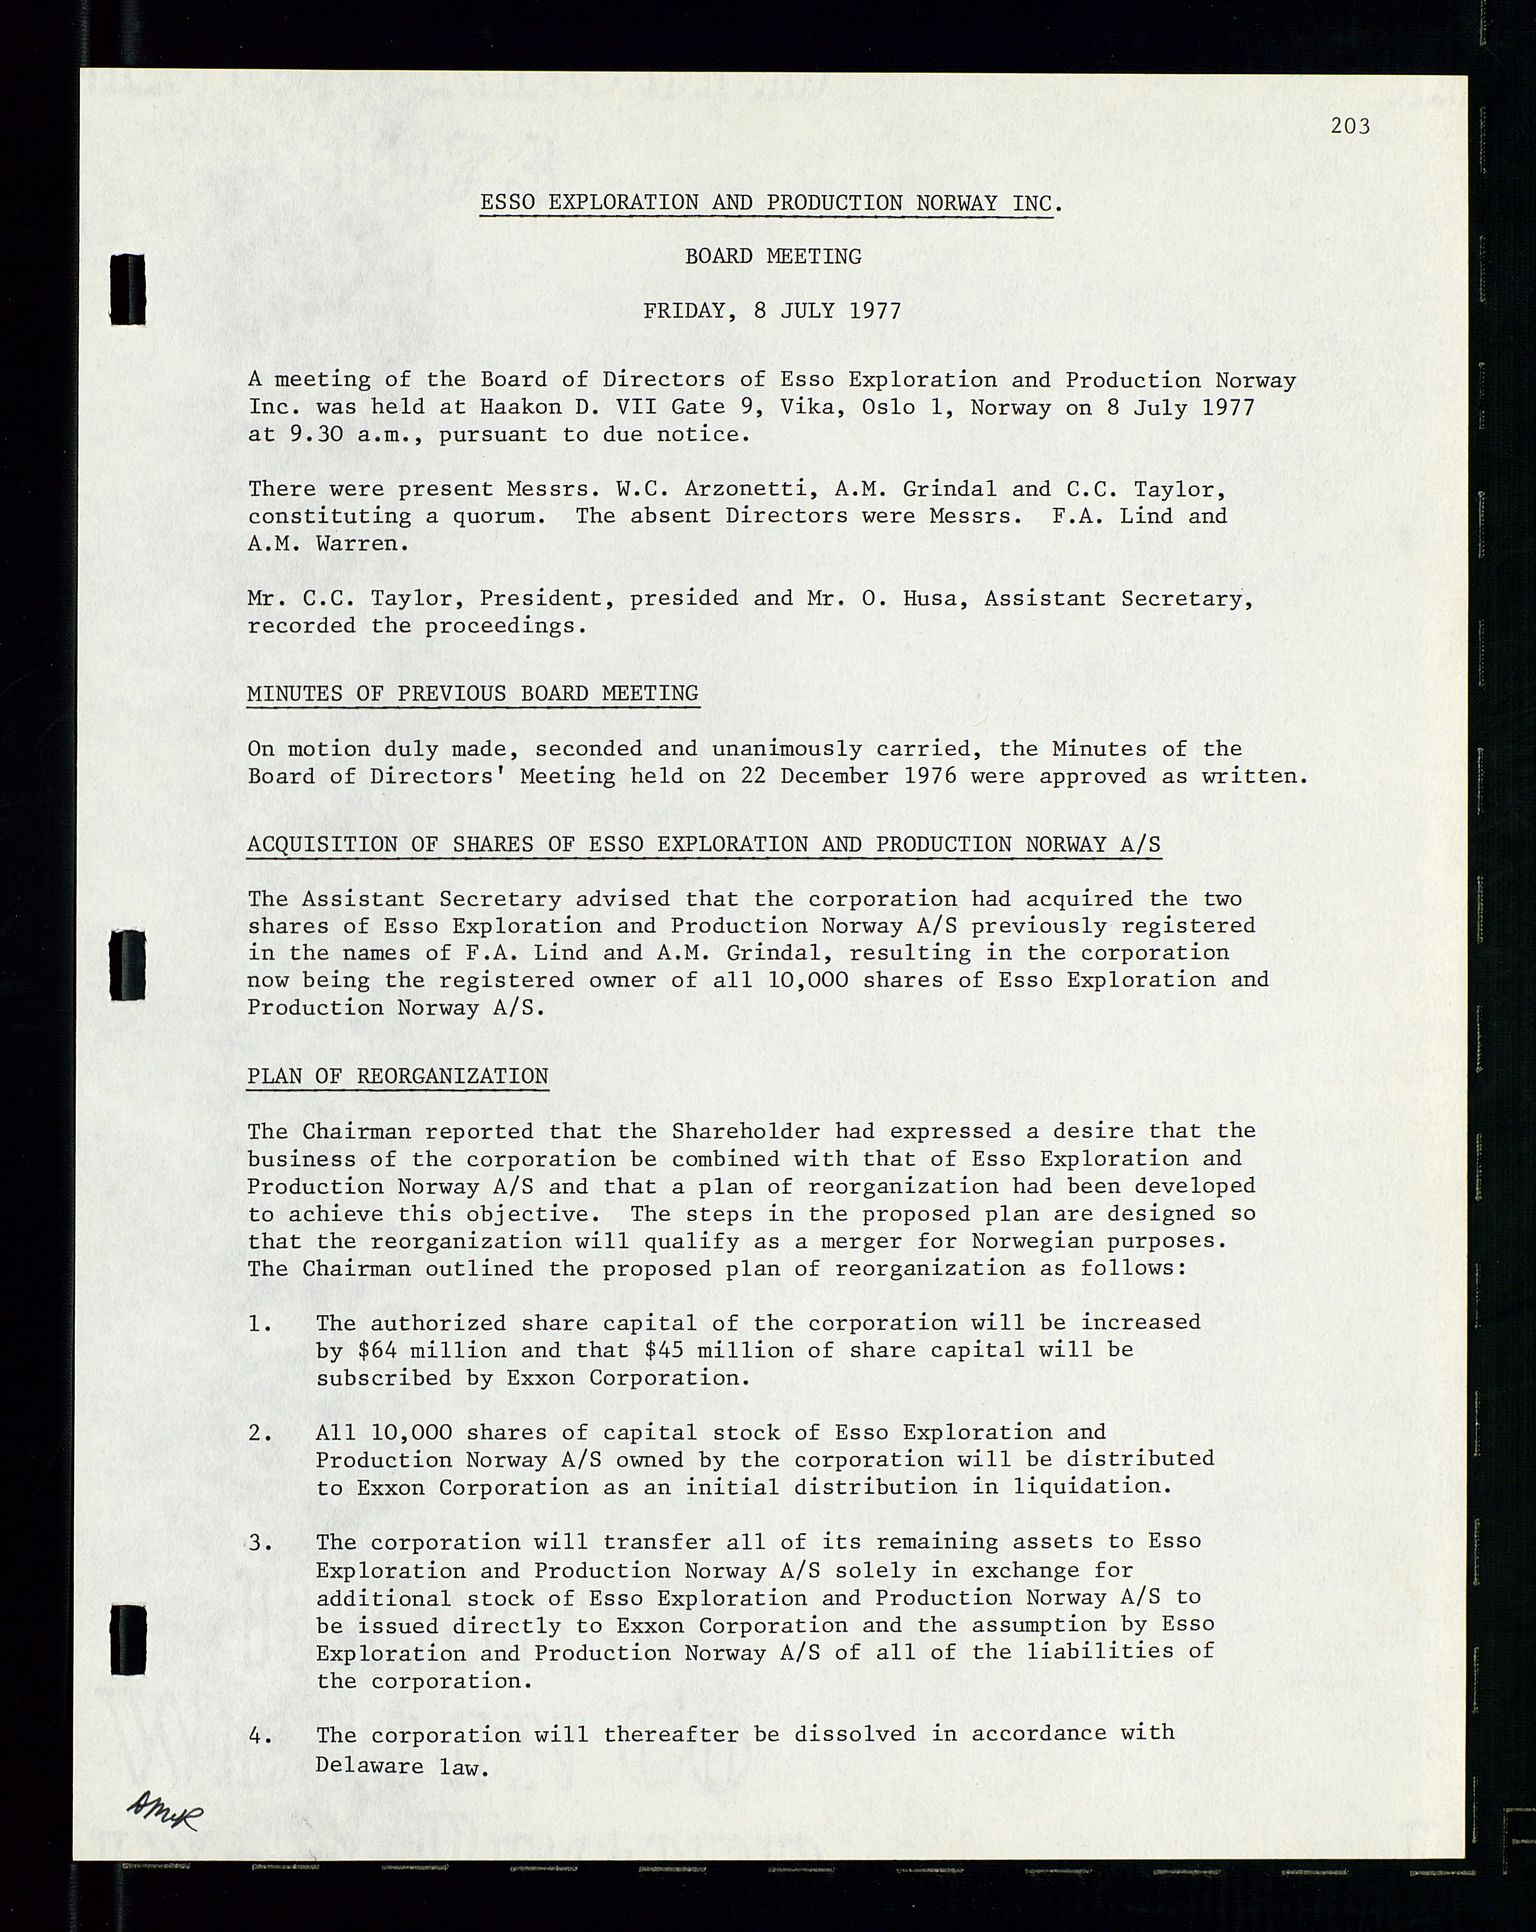 Pa 1512 - Esso Exploration and Production Norway Inc., SAST/A-101917/A/Aa/L0001/0002: Styredokumenter / Corporate records, Board meeting minutes, Agreements, Stocholder meetings, 1975-1979, s. 54